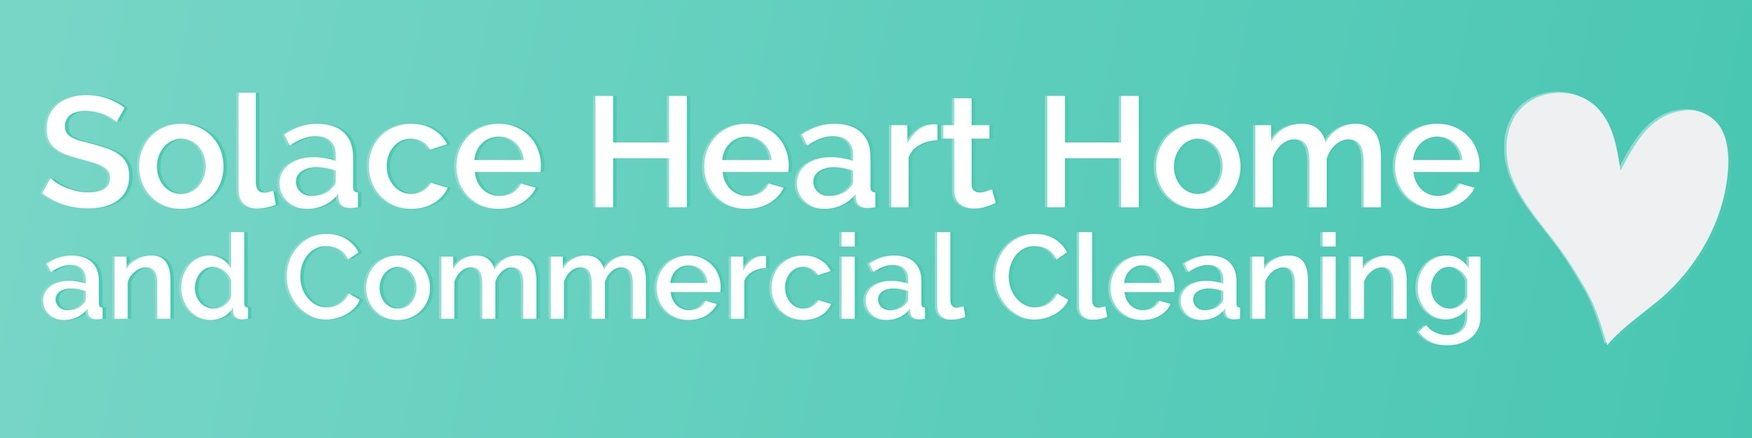 Solace Heart Home and Commercial Cleaning